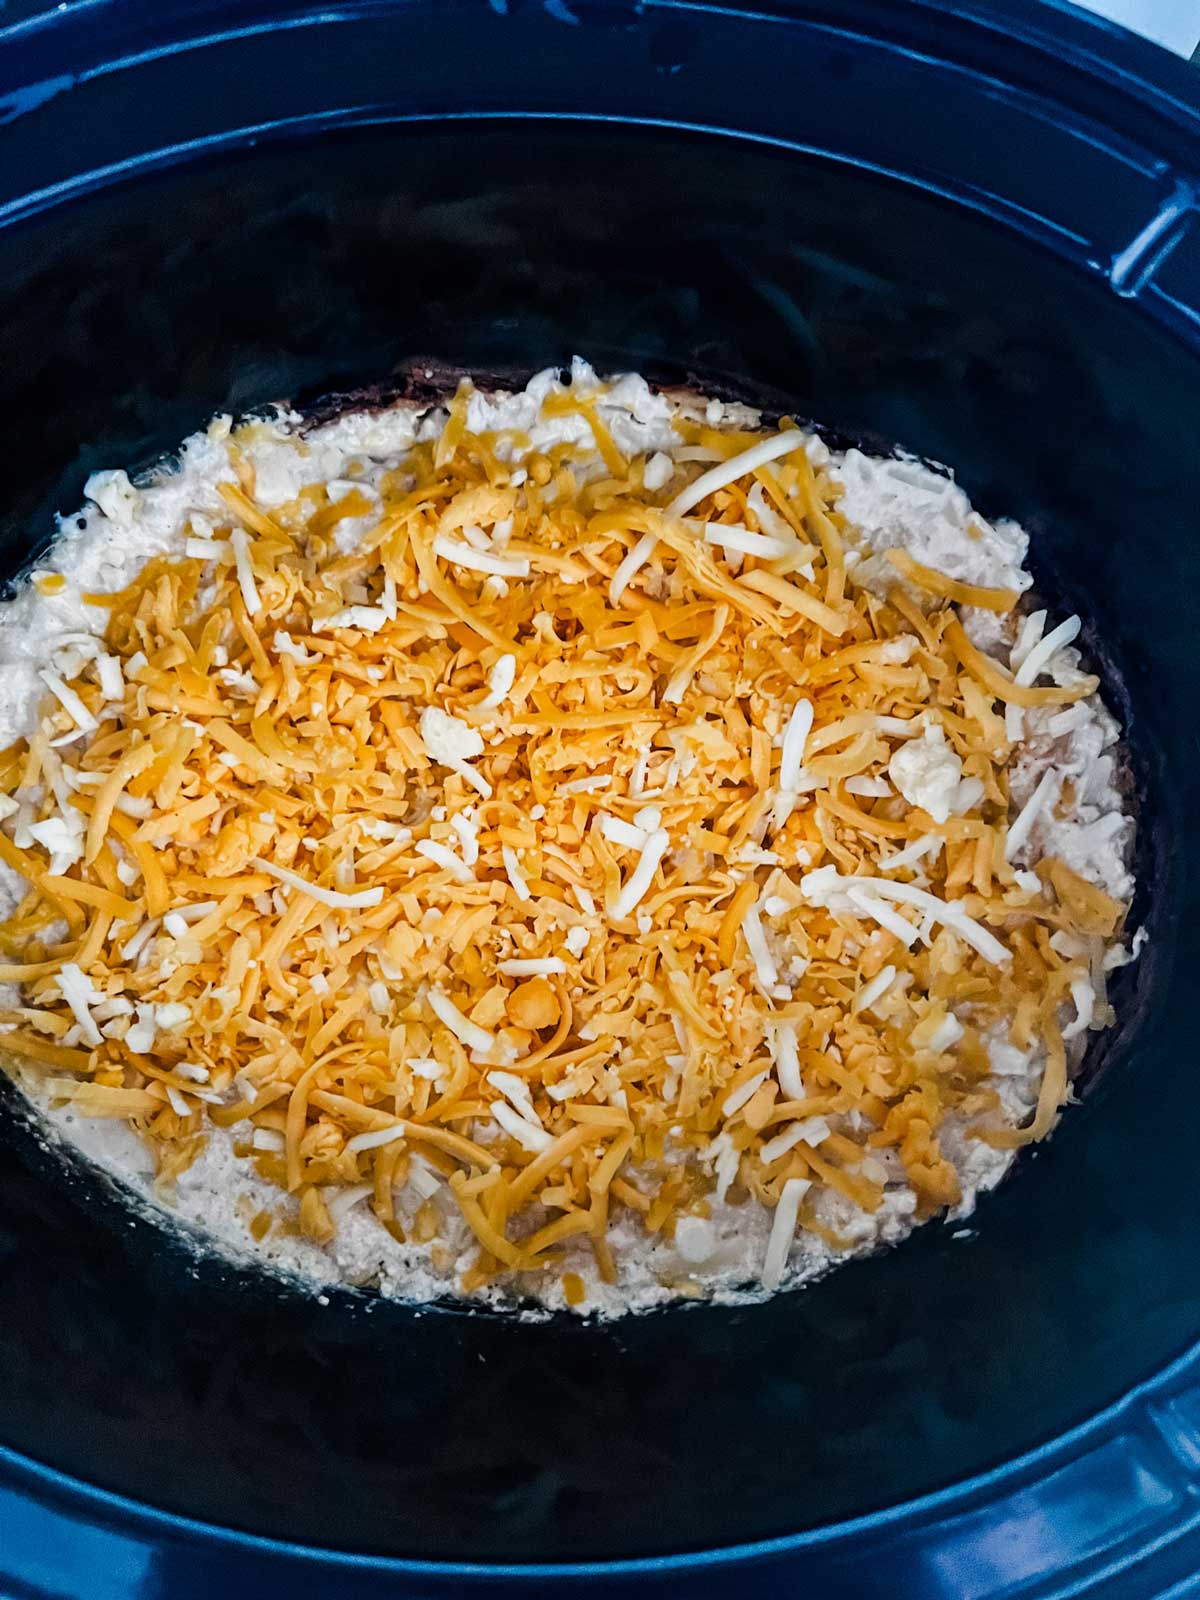 Crockpot cheesy hash brown casserole in a slow cooker ready to cook.